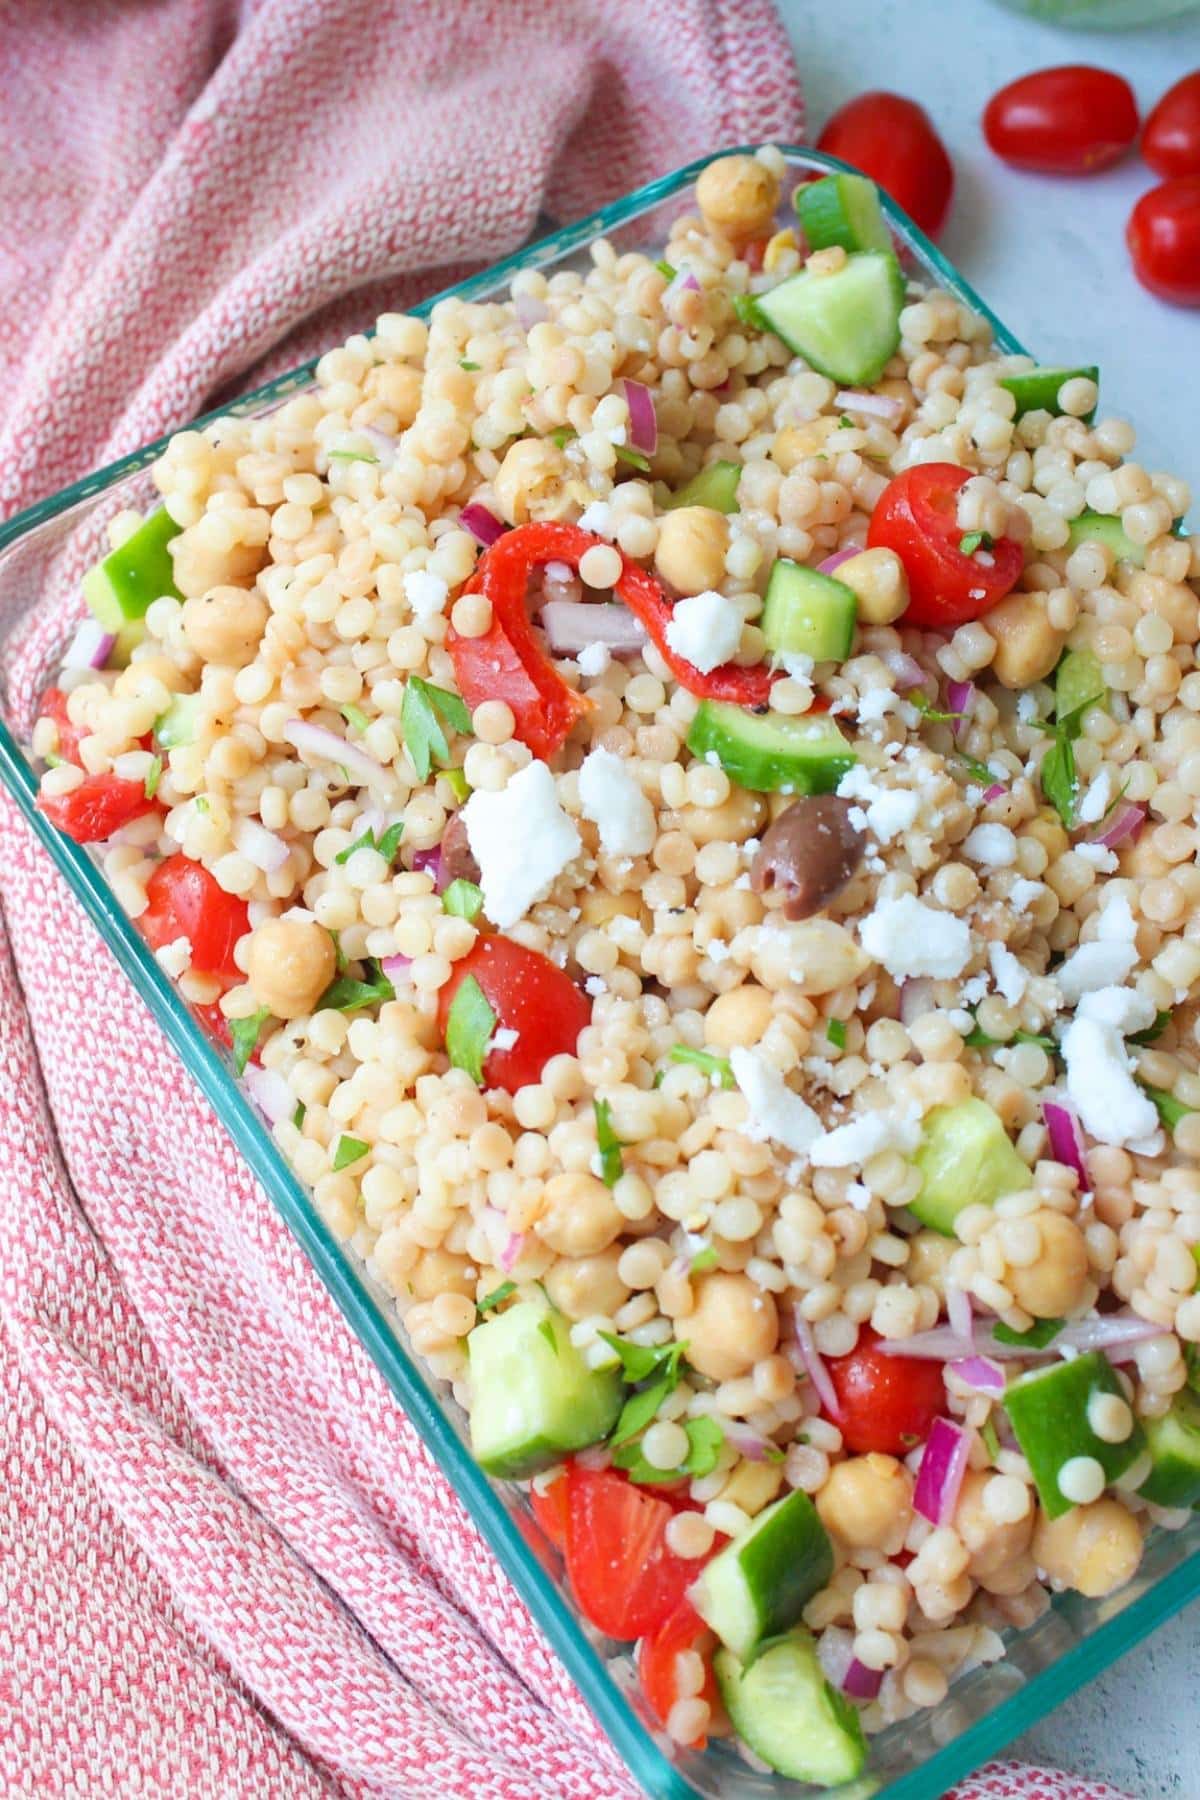 Israeli couscous vegetable salad in a glass serving dish.